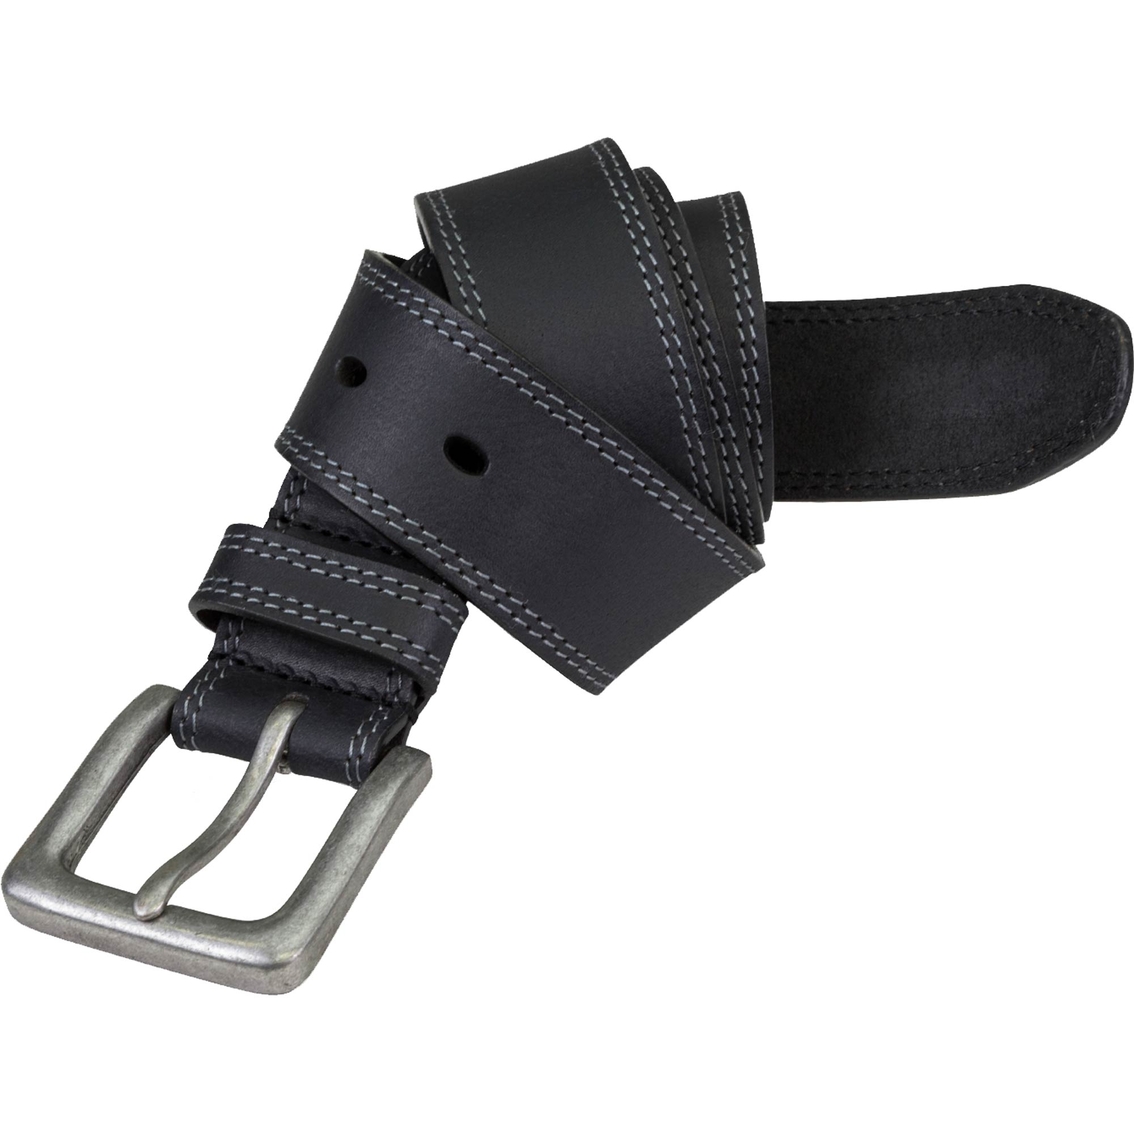 Timberland Boot Leather Belt 38mm - Image 2 of 3